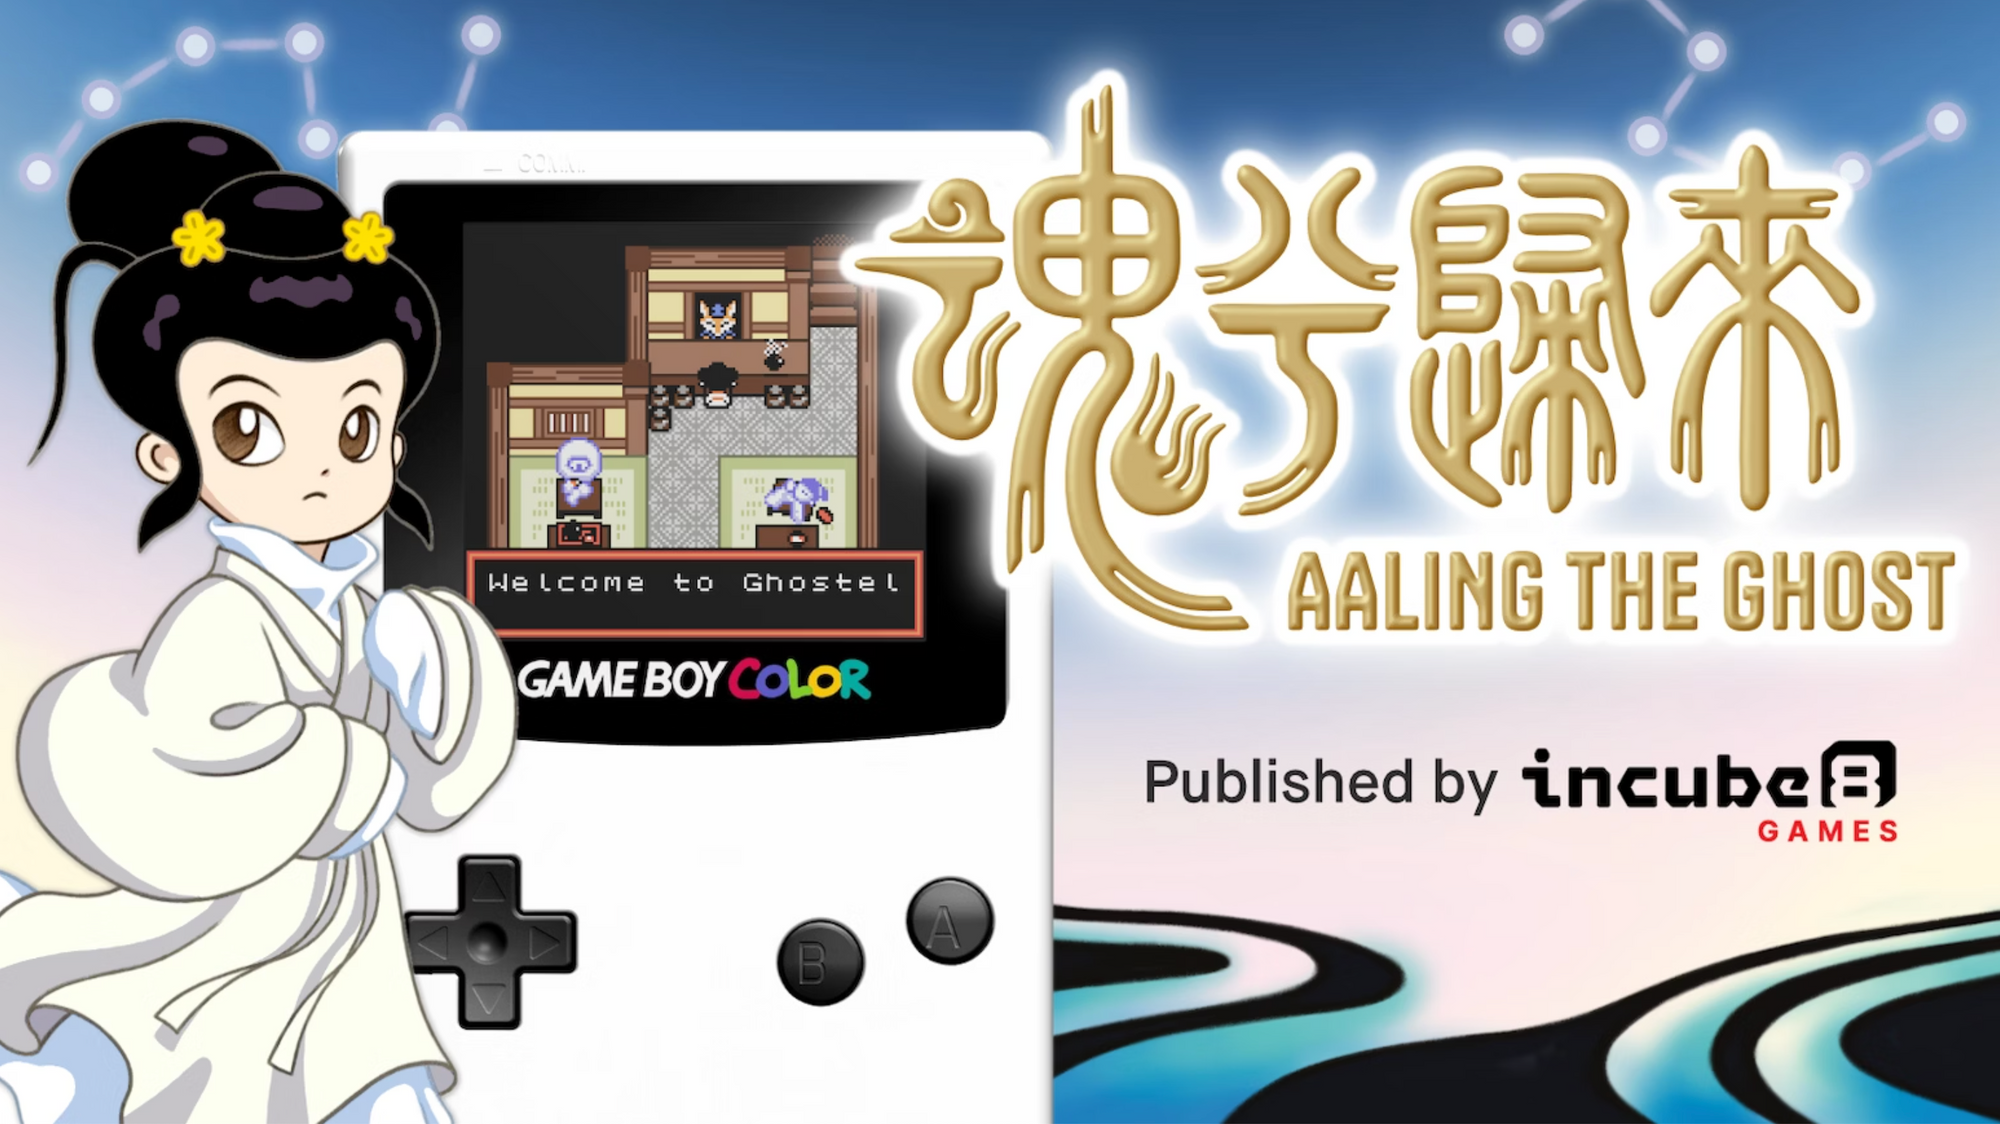 Get ready to embark on a captivating adventure in "Aaling The Ghost" and support the Kickstarter campaign to bring this unique Game Boy Color game to life.